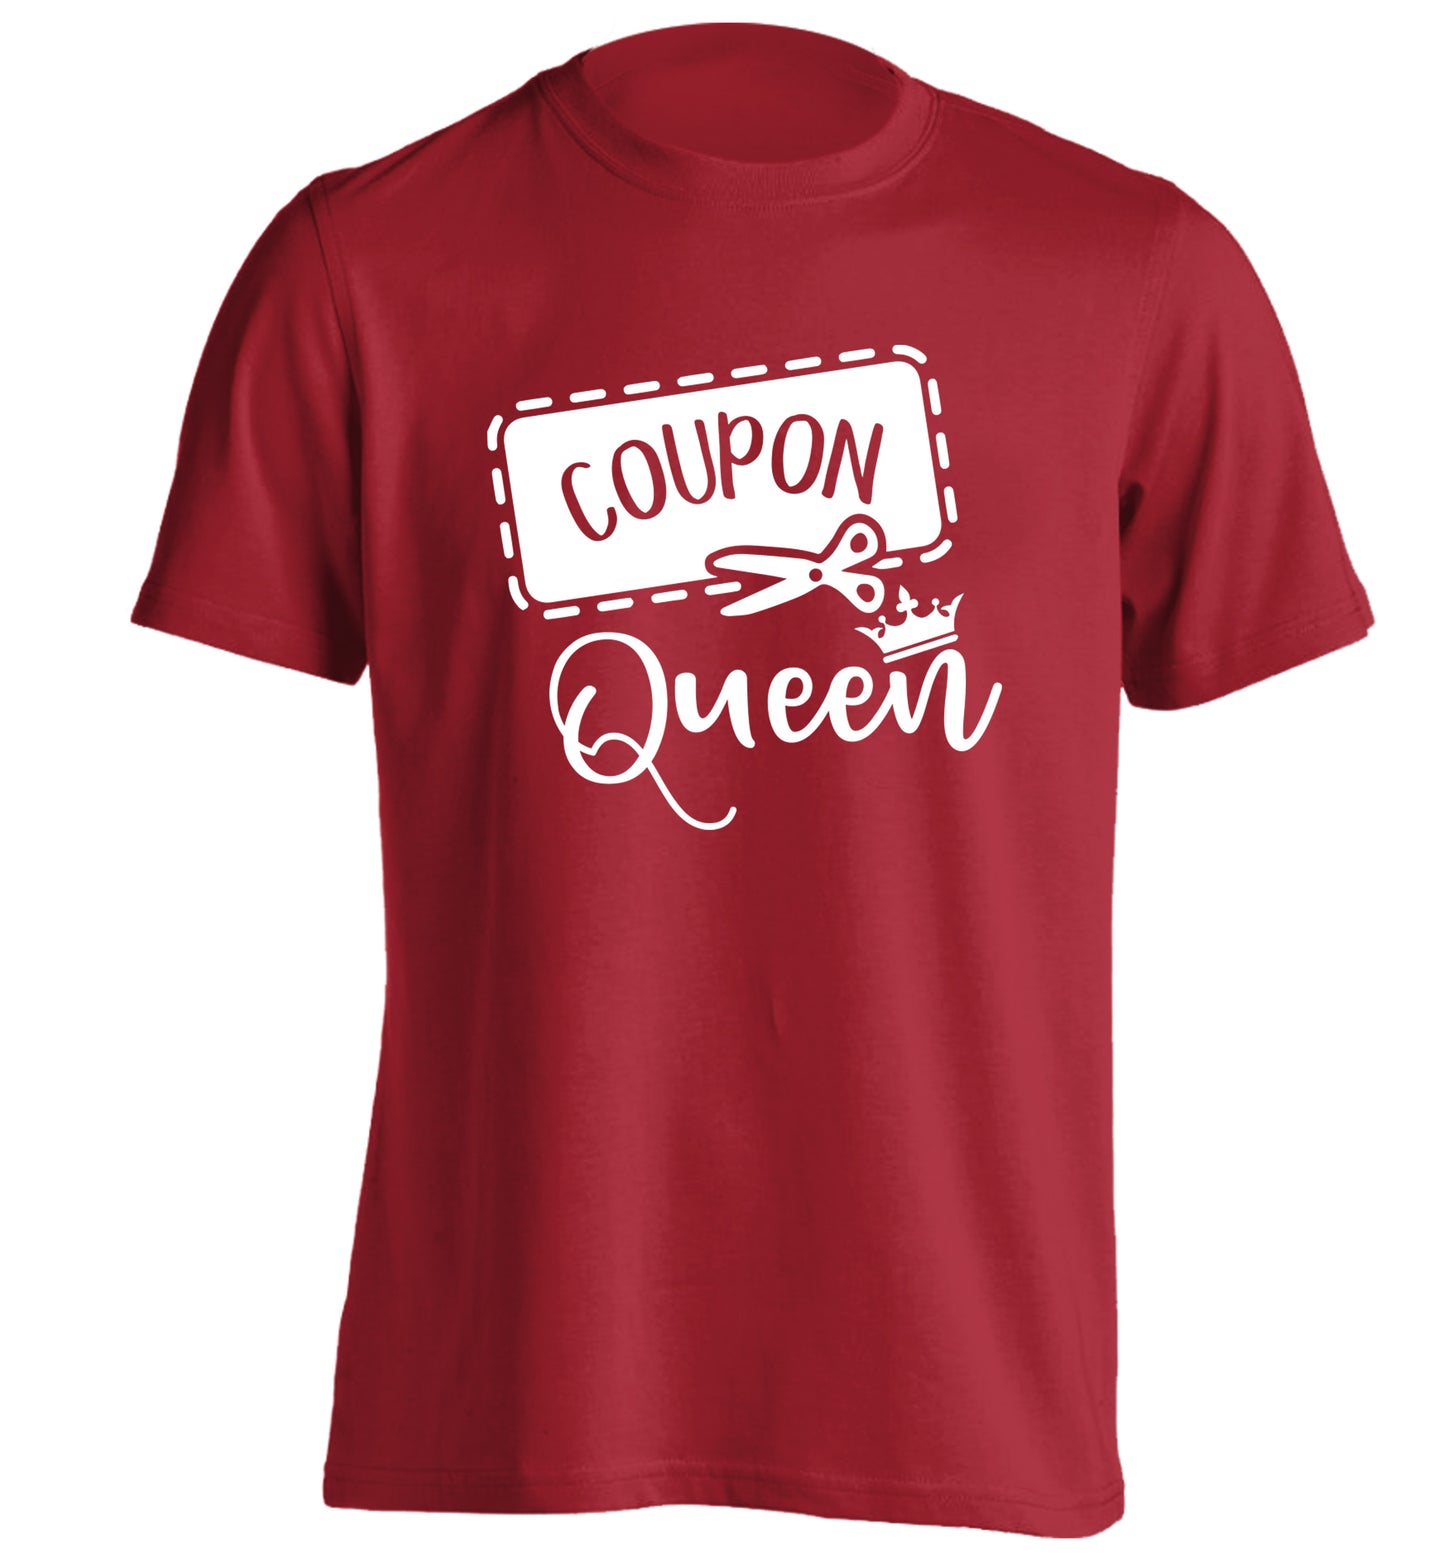 Coupon Queen adults unisex red Tshirt 2XL